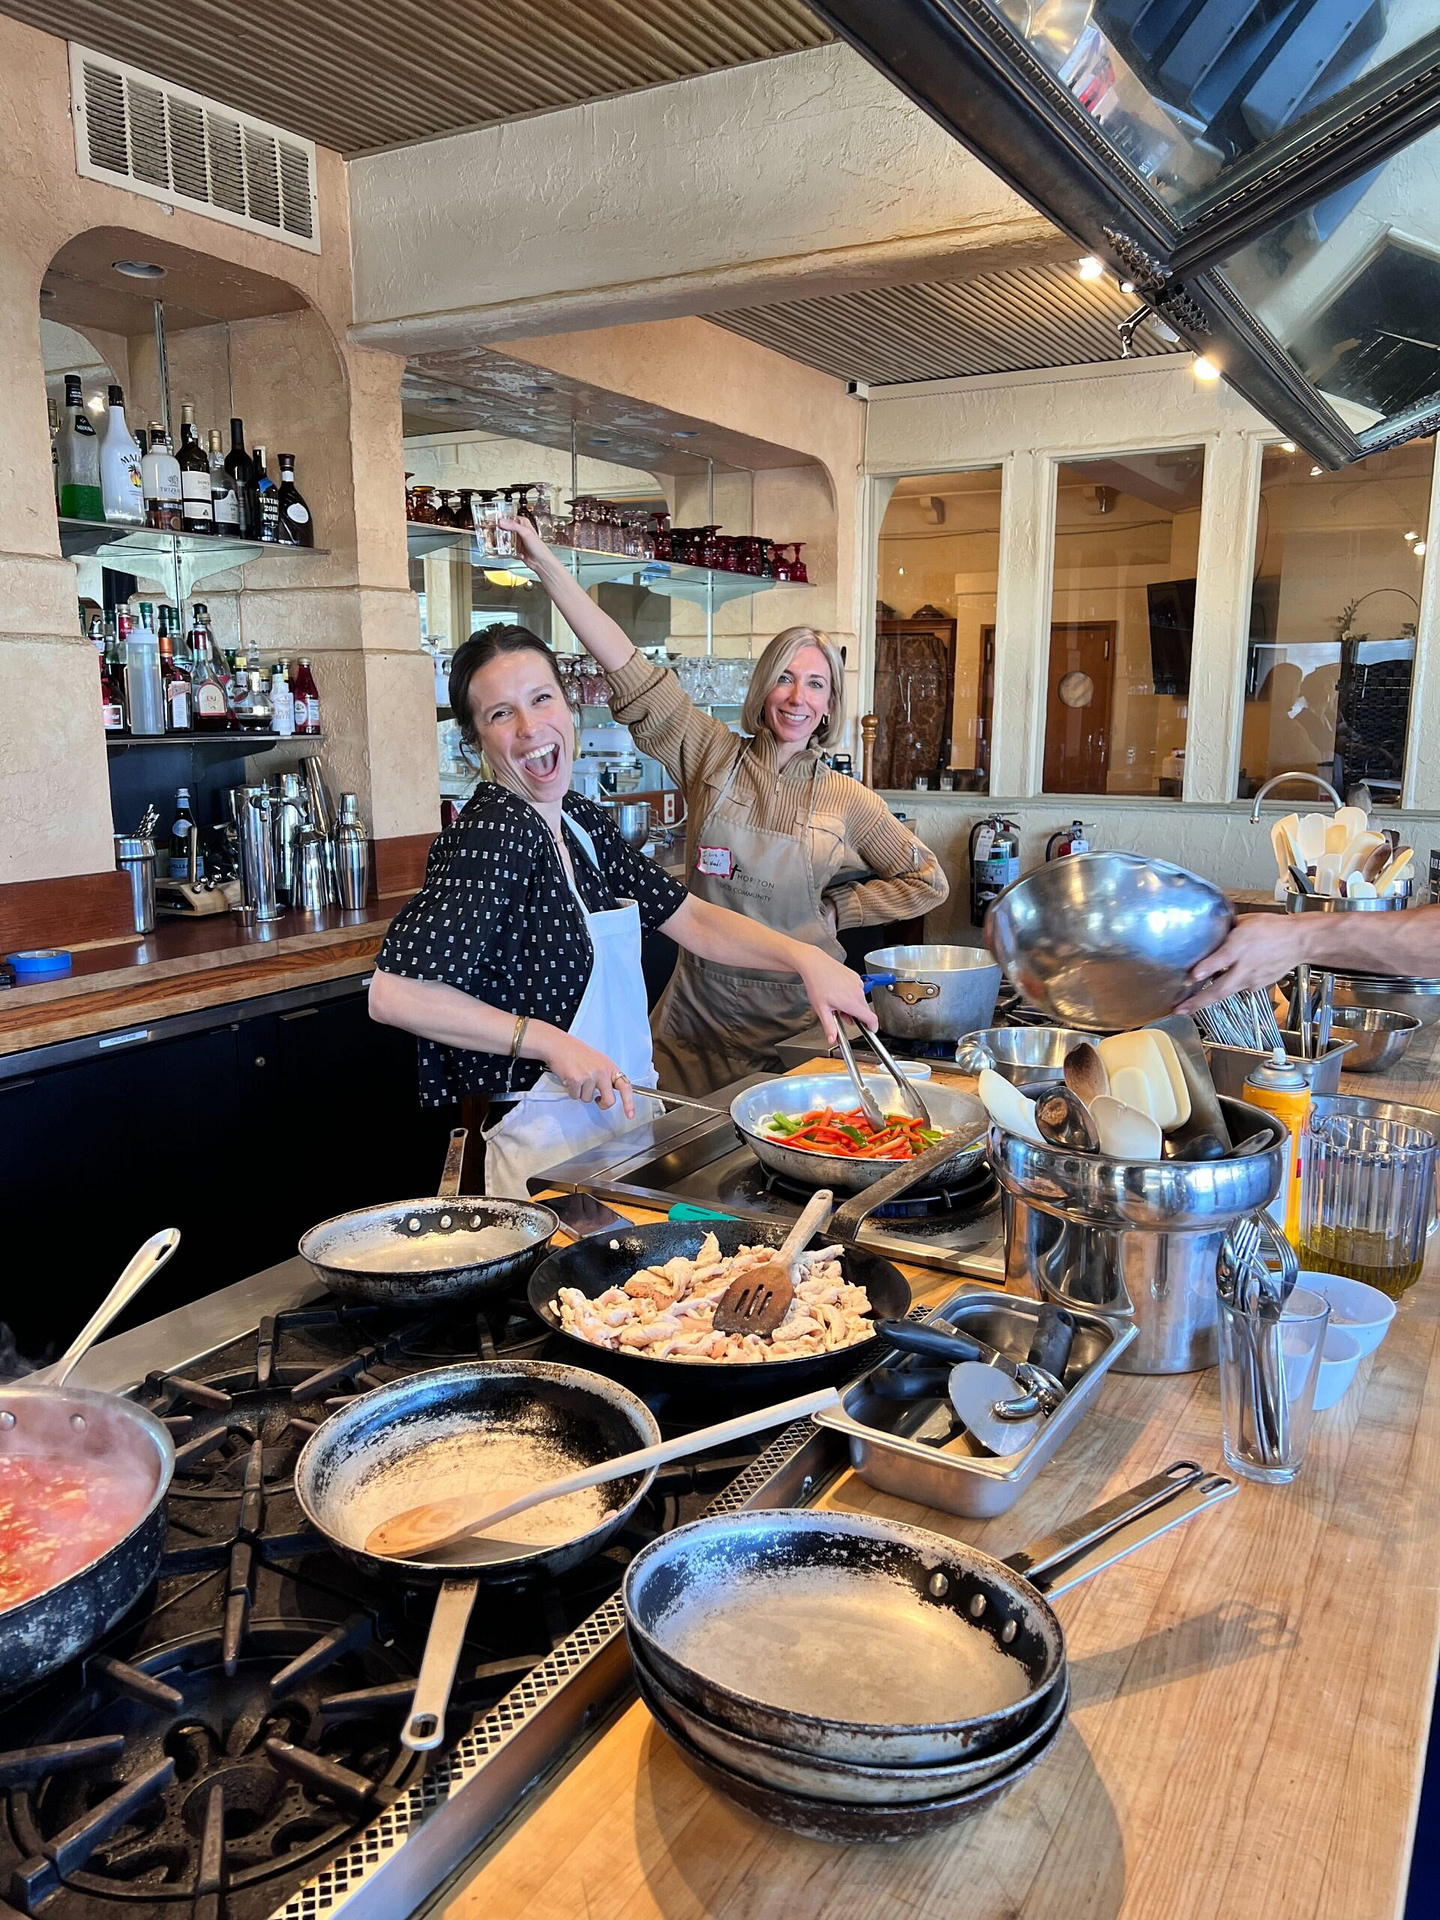 2 mentor employees having fun at a cooking class